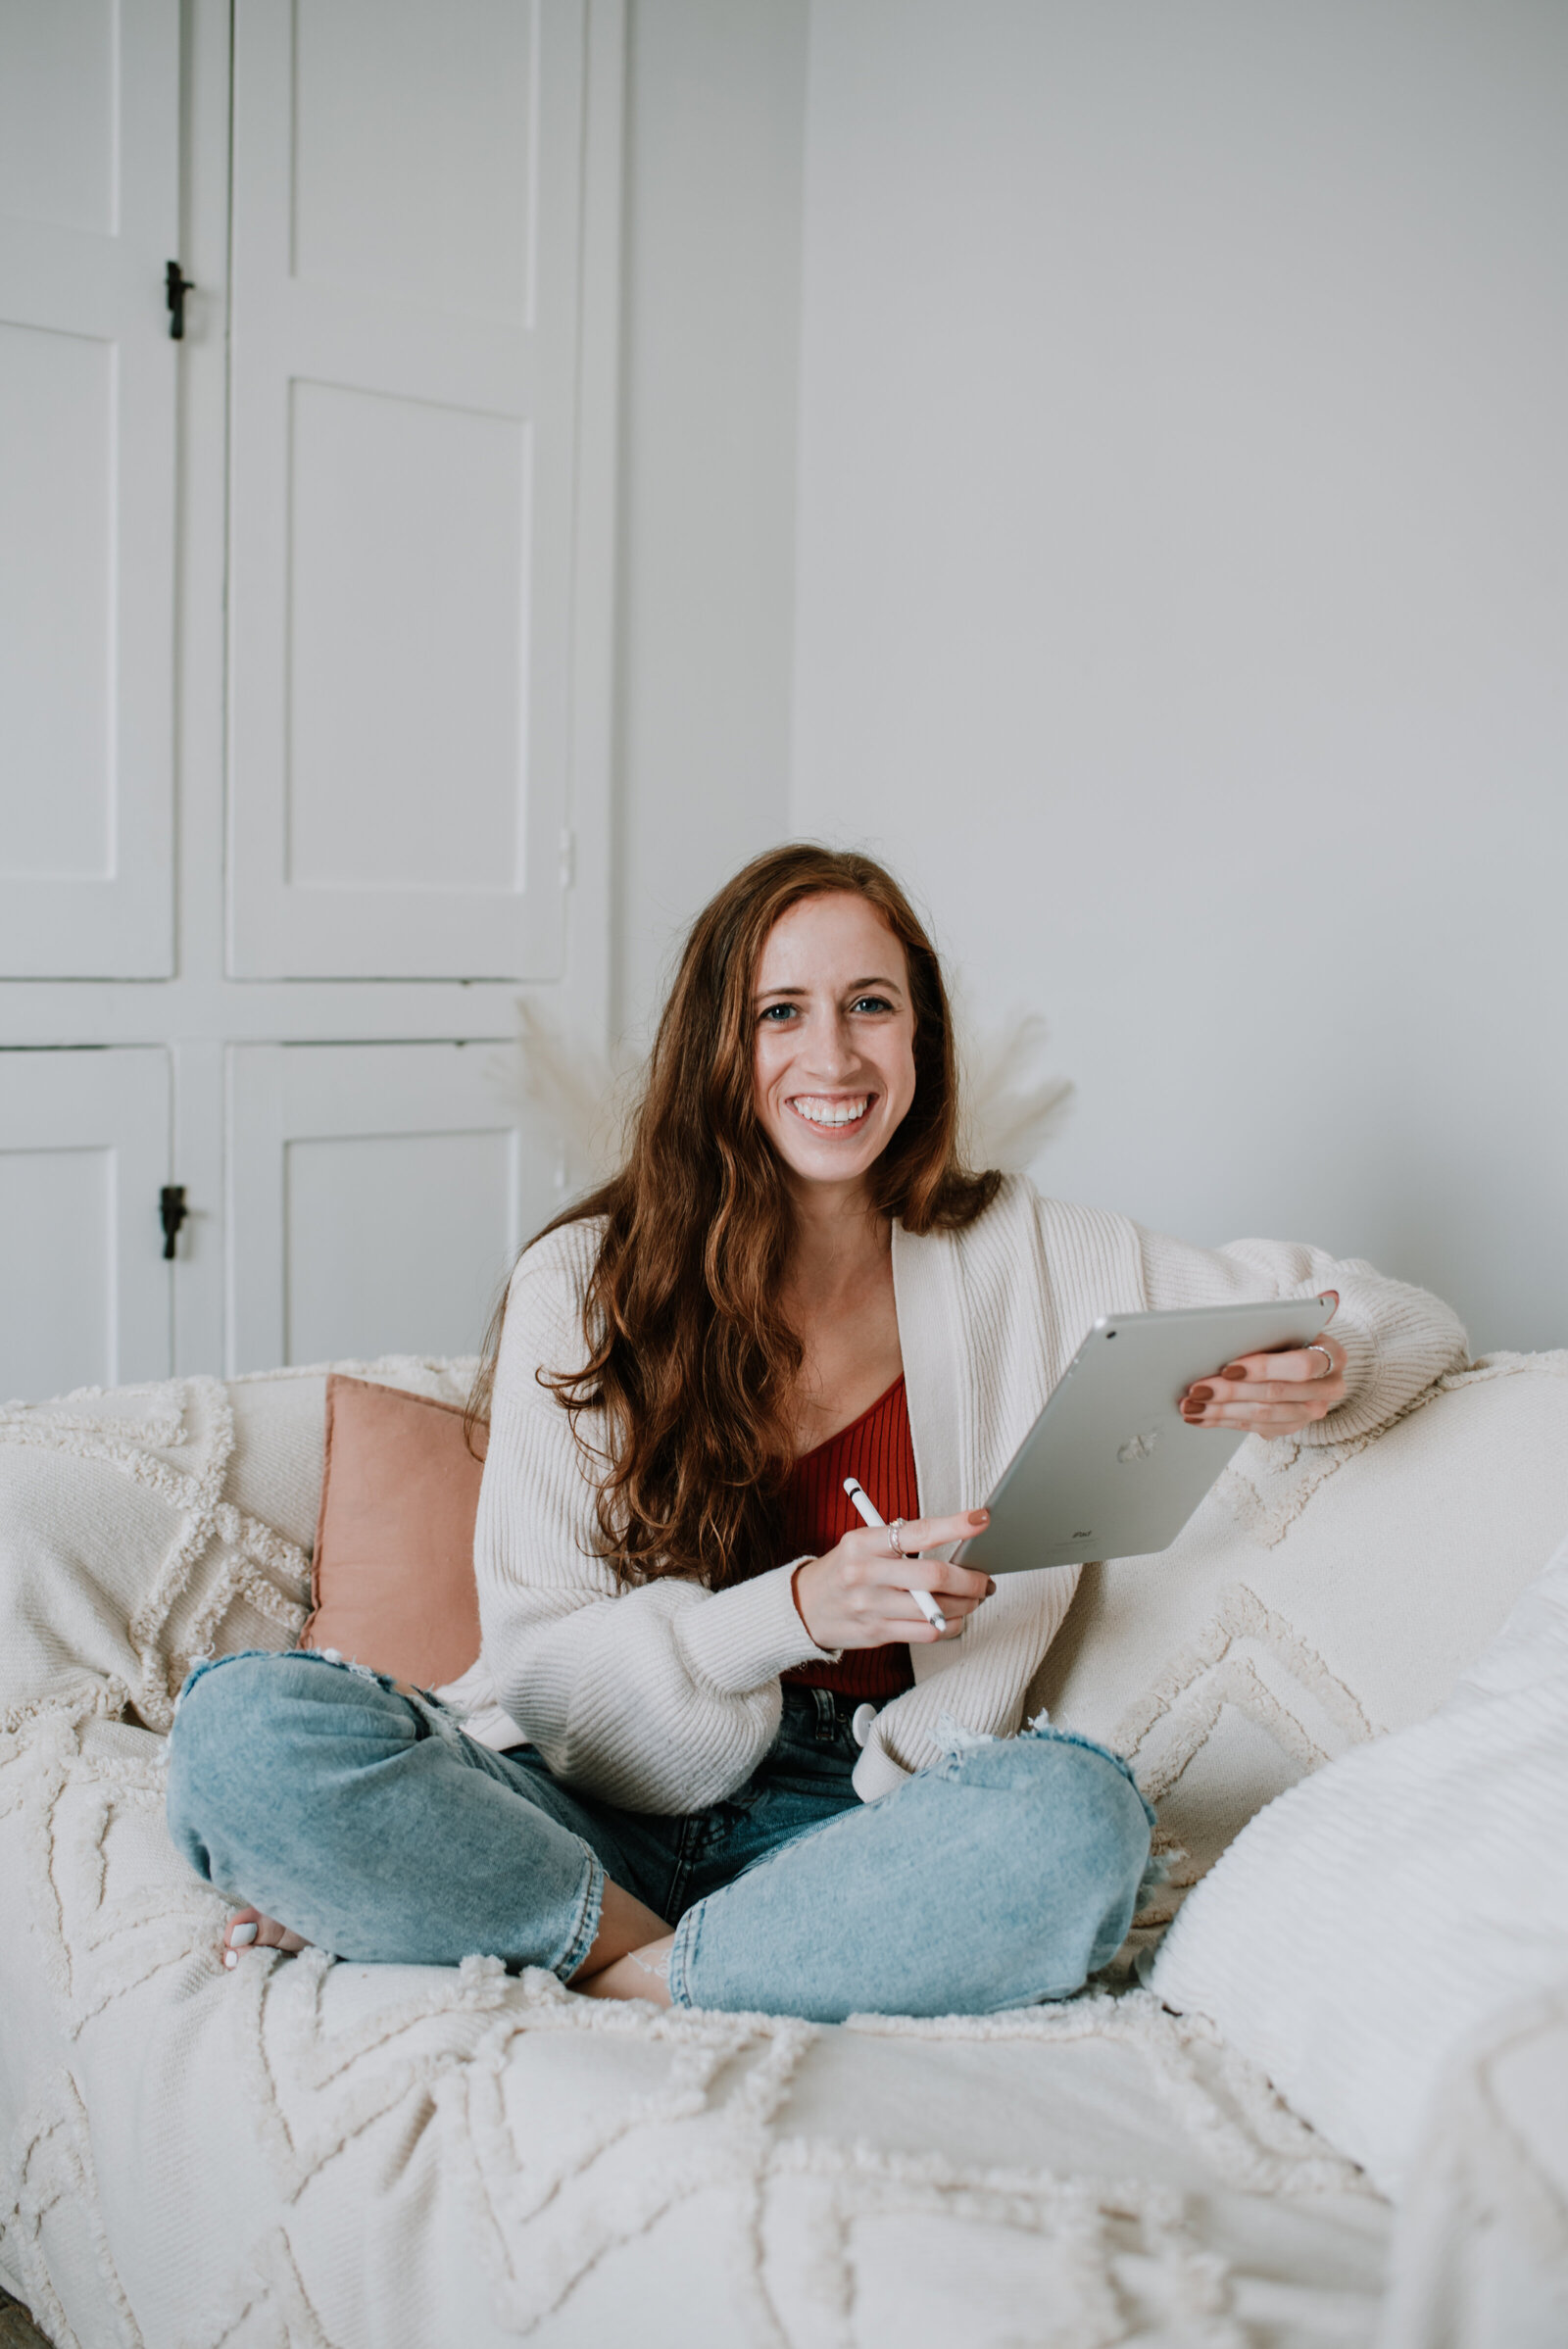 woman dressed in neutral clothing is sat on the sofa, holding a tablet and e-pen, smiling